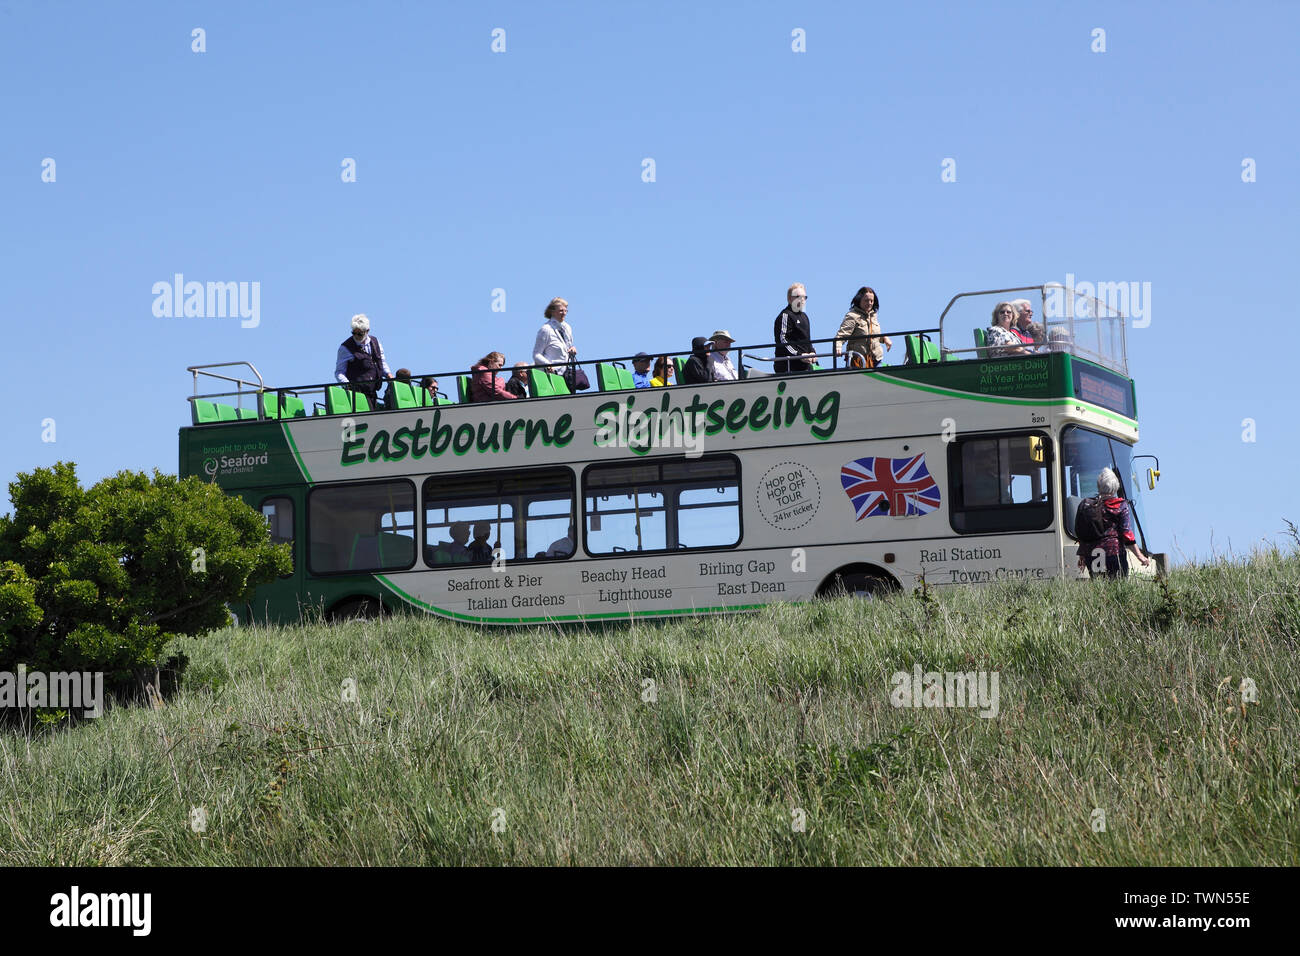 Eastbourne sightseeing bus at Beachy Head, East Sussex, UK Stock Photo